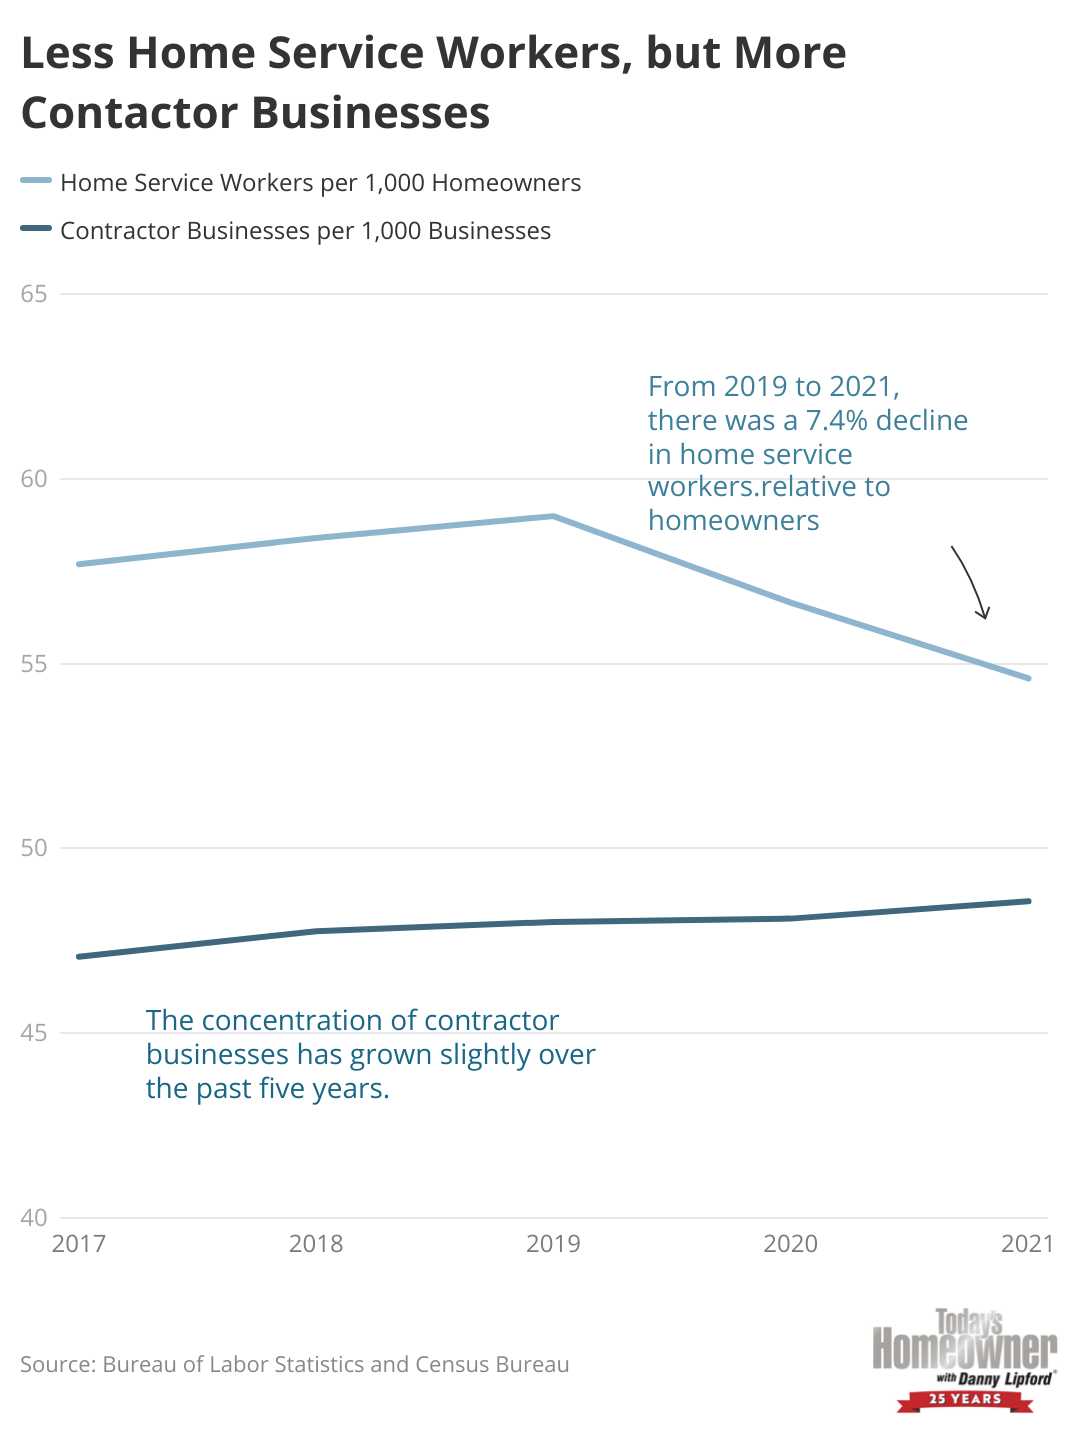 A line chart of the concentration of home service workers per 1,000 homeowners and of contractor businesses per 1,000 businesses, where home service workers became 7.4% fewer from 2019 to 2021 but contractor businesses became slightly more common.